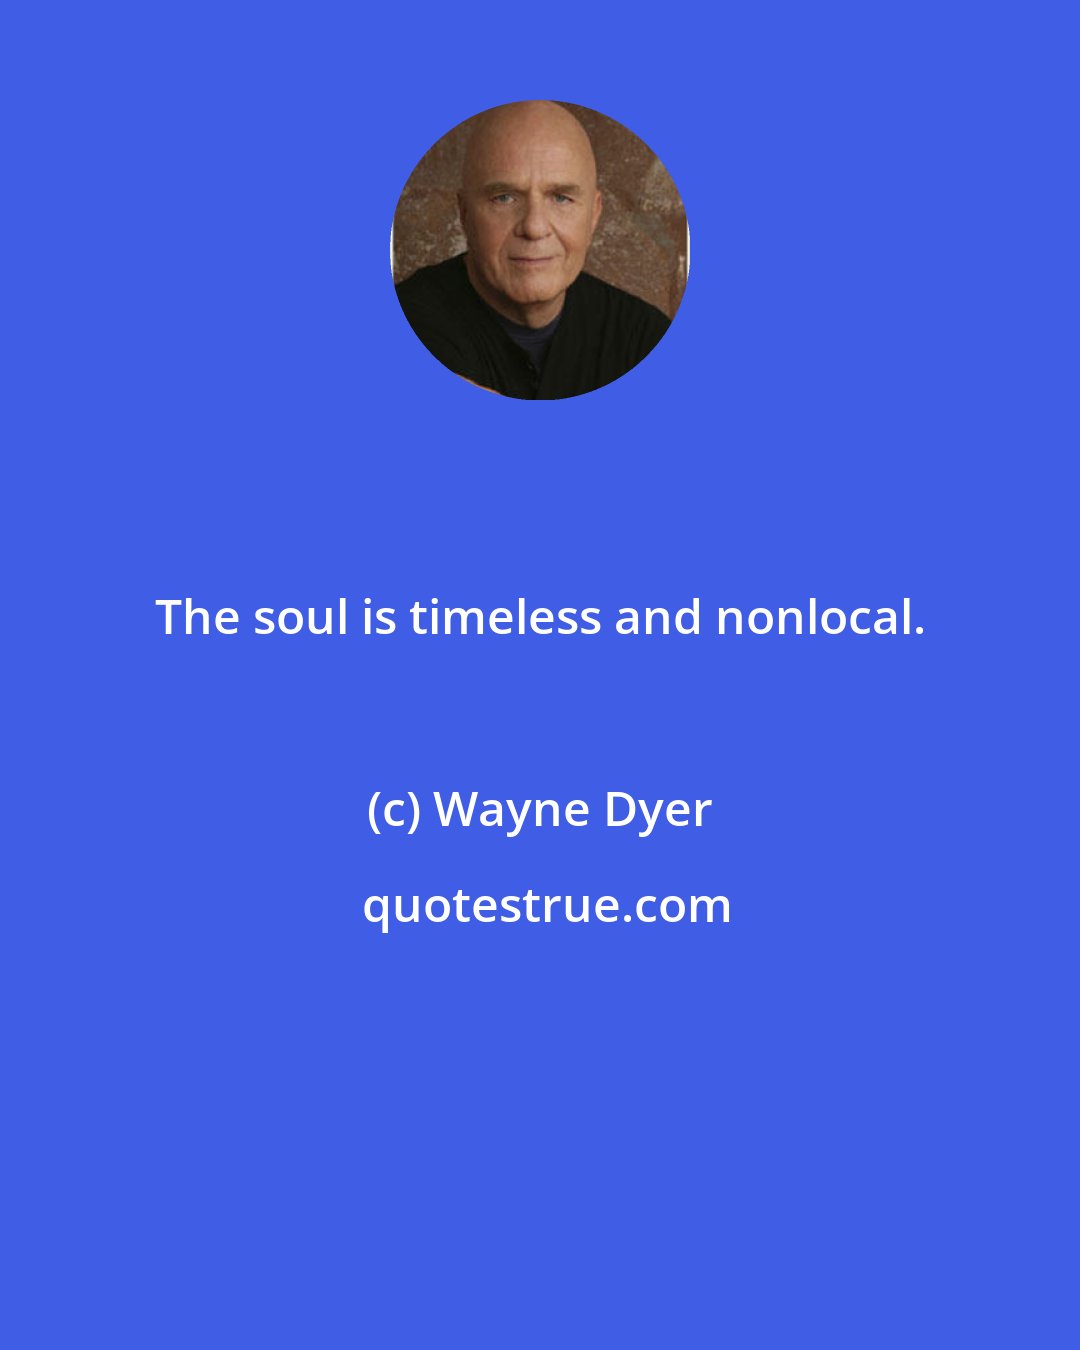 Wayne Dyer: The soul is timeless and nonlocal.